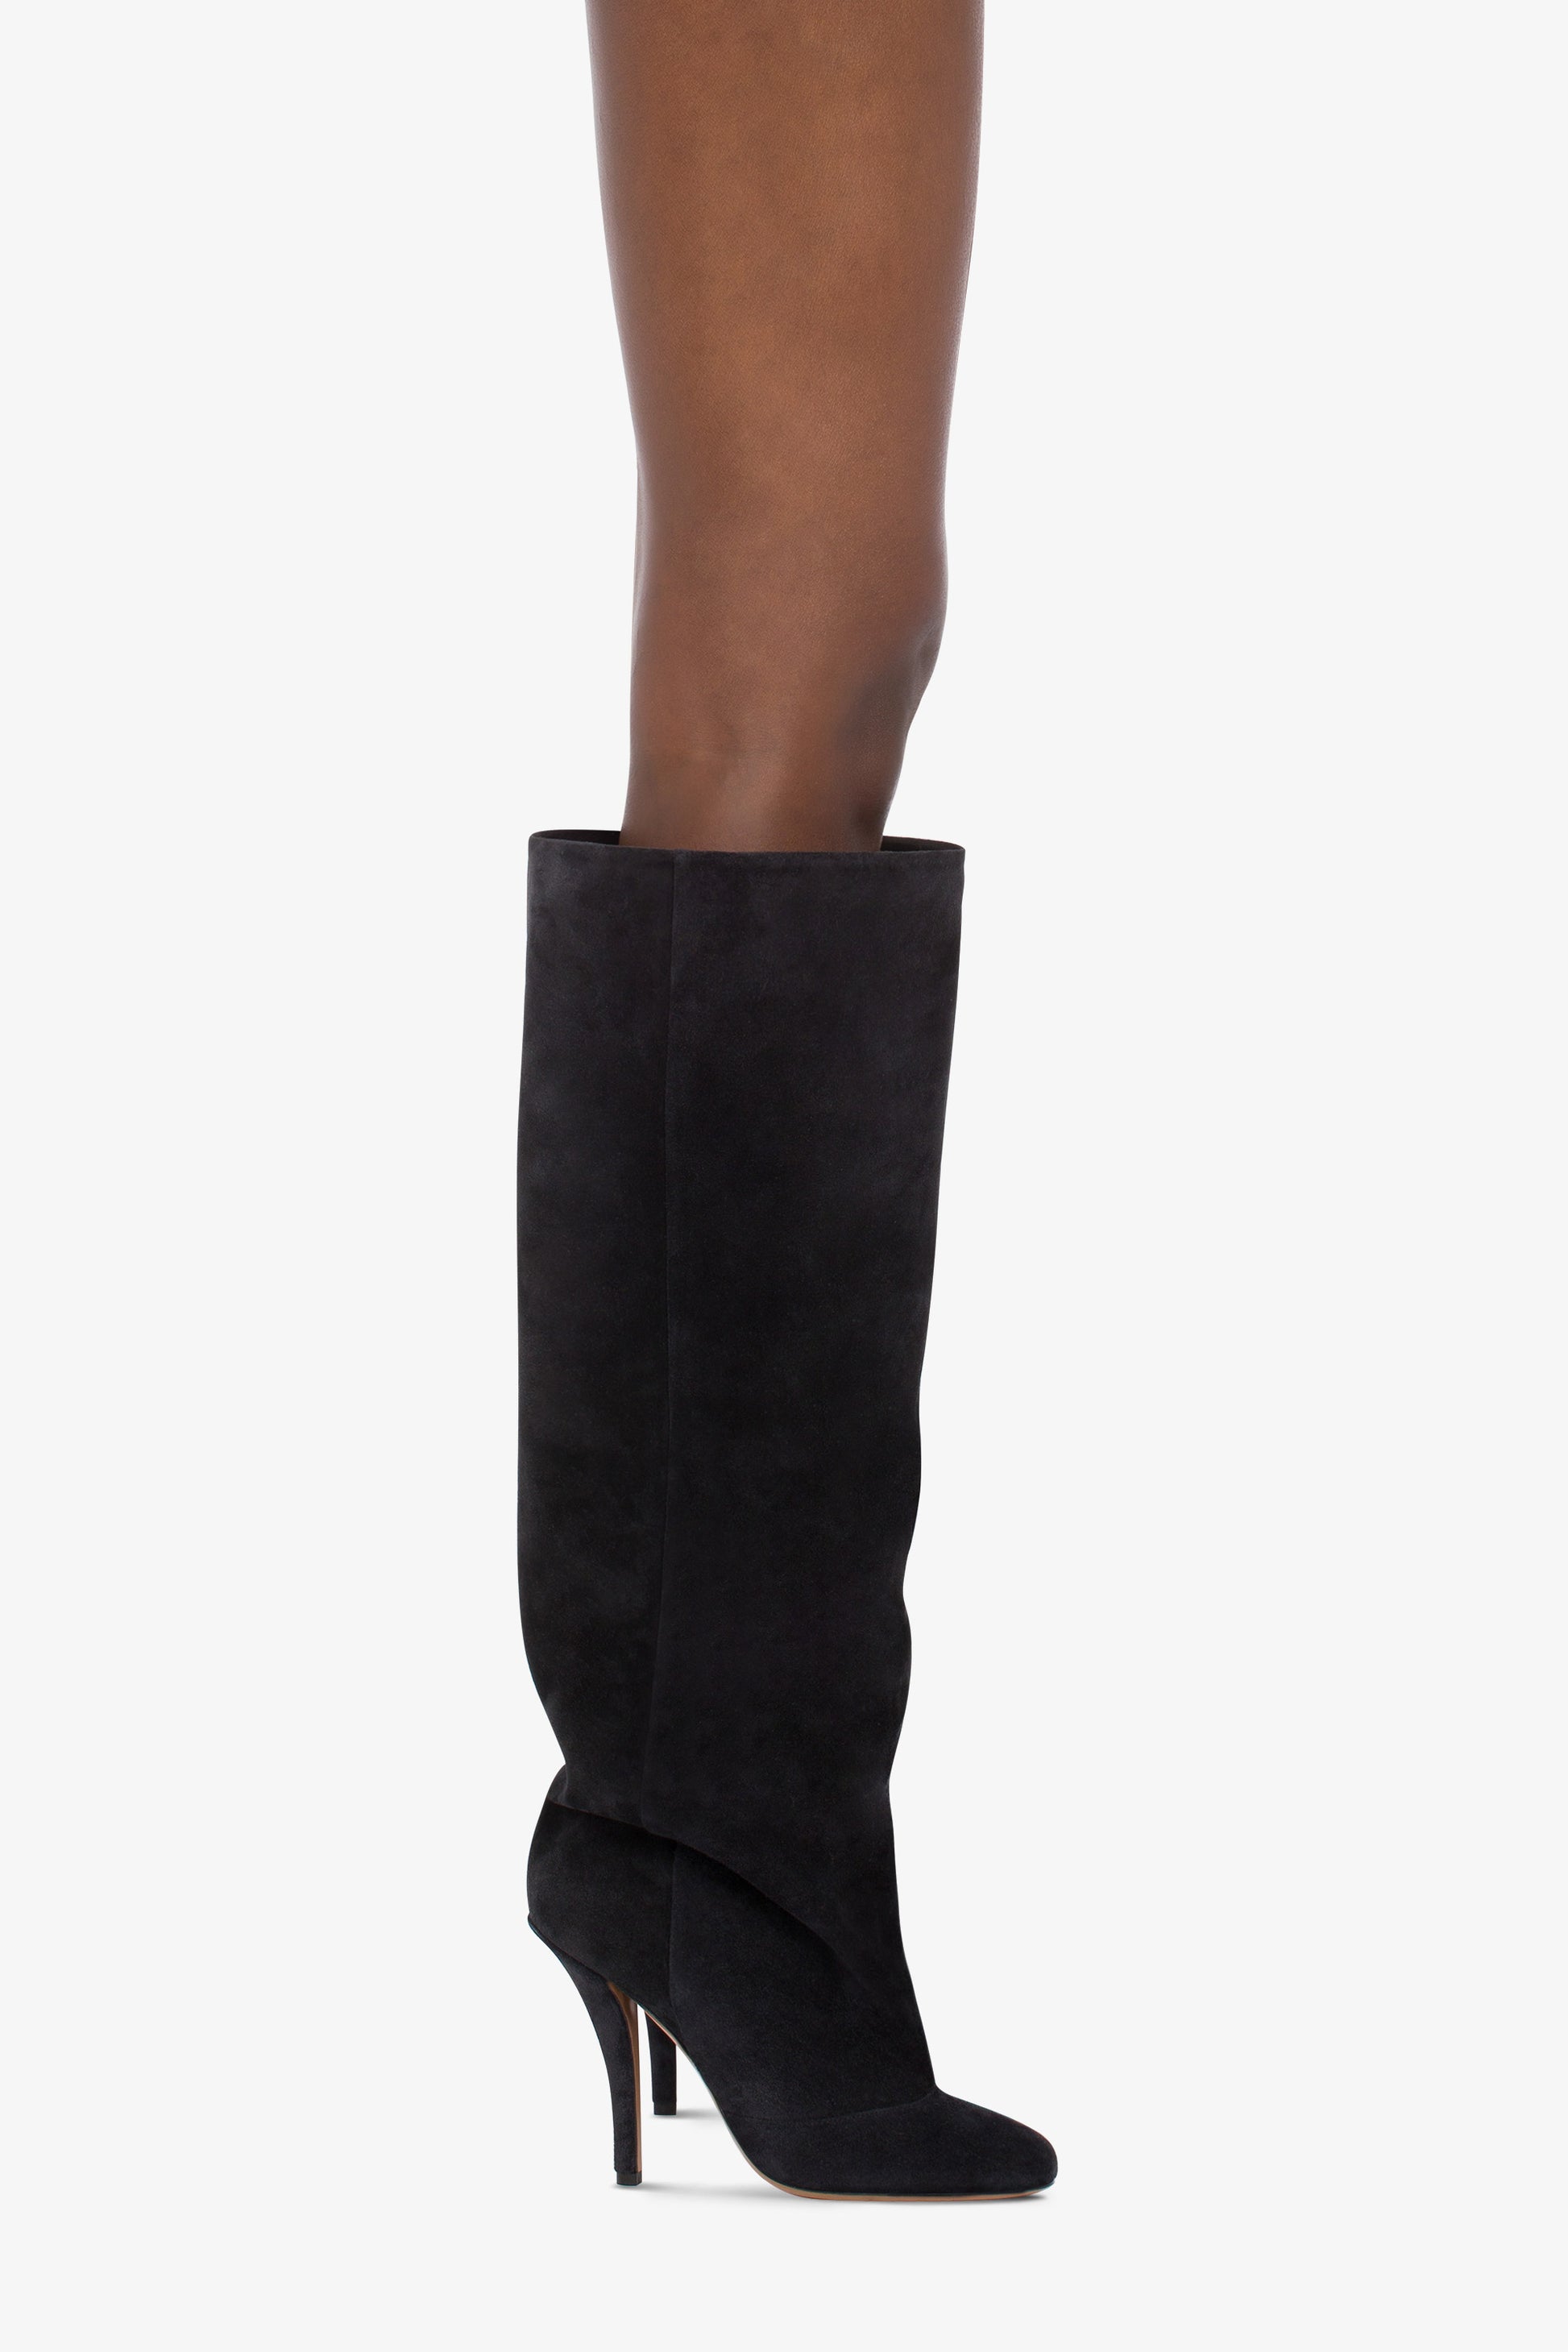 Knee-high boots in soft off-black suede leather - Producto usado